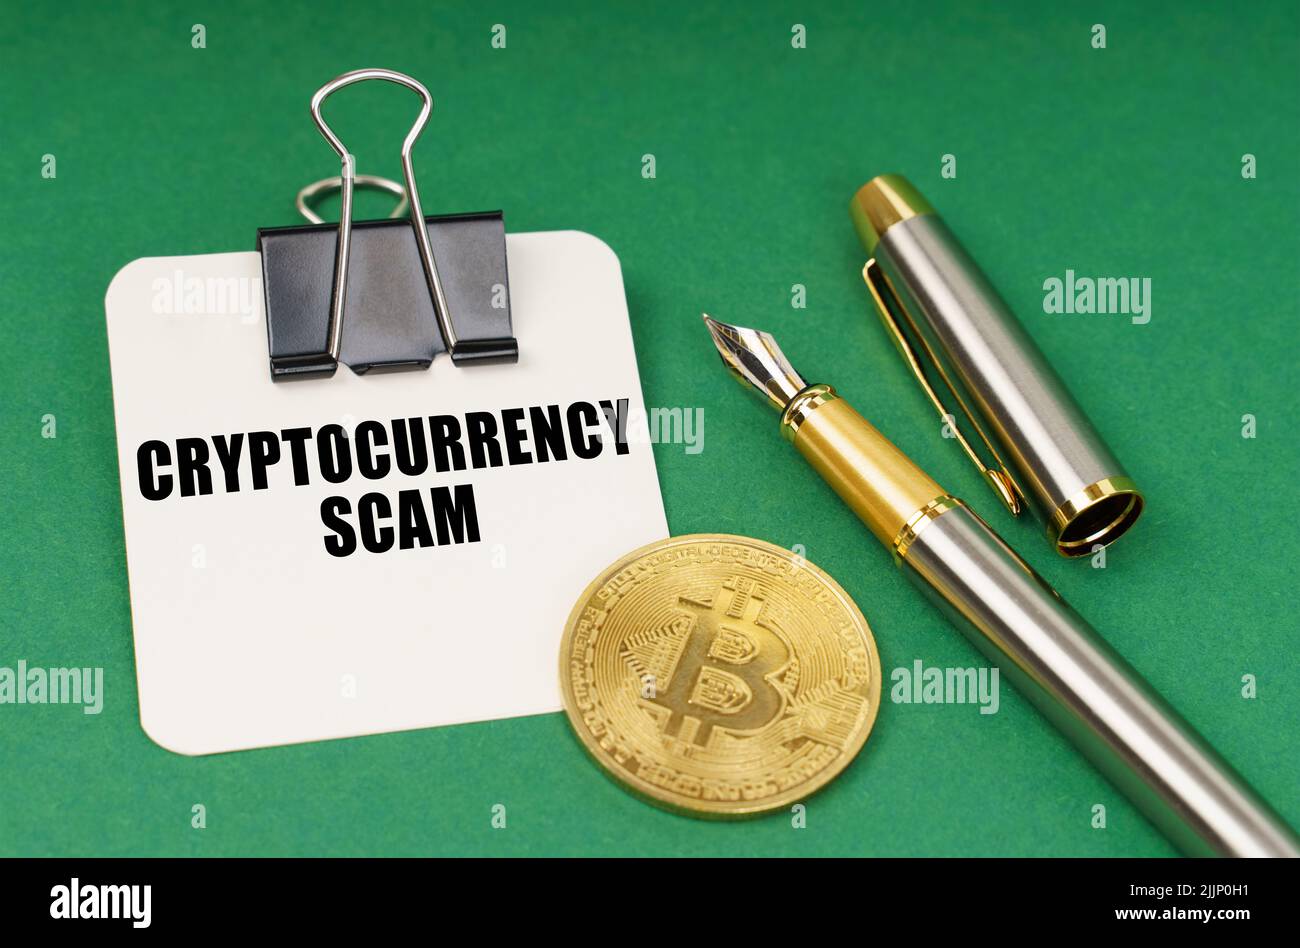 Cryptocurrency and business concept. On a green surface, a bitcoin coin, a pen and a sheet of paper with the inscription - Cryptocurrency scam Stock Photo